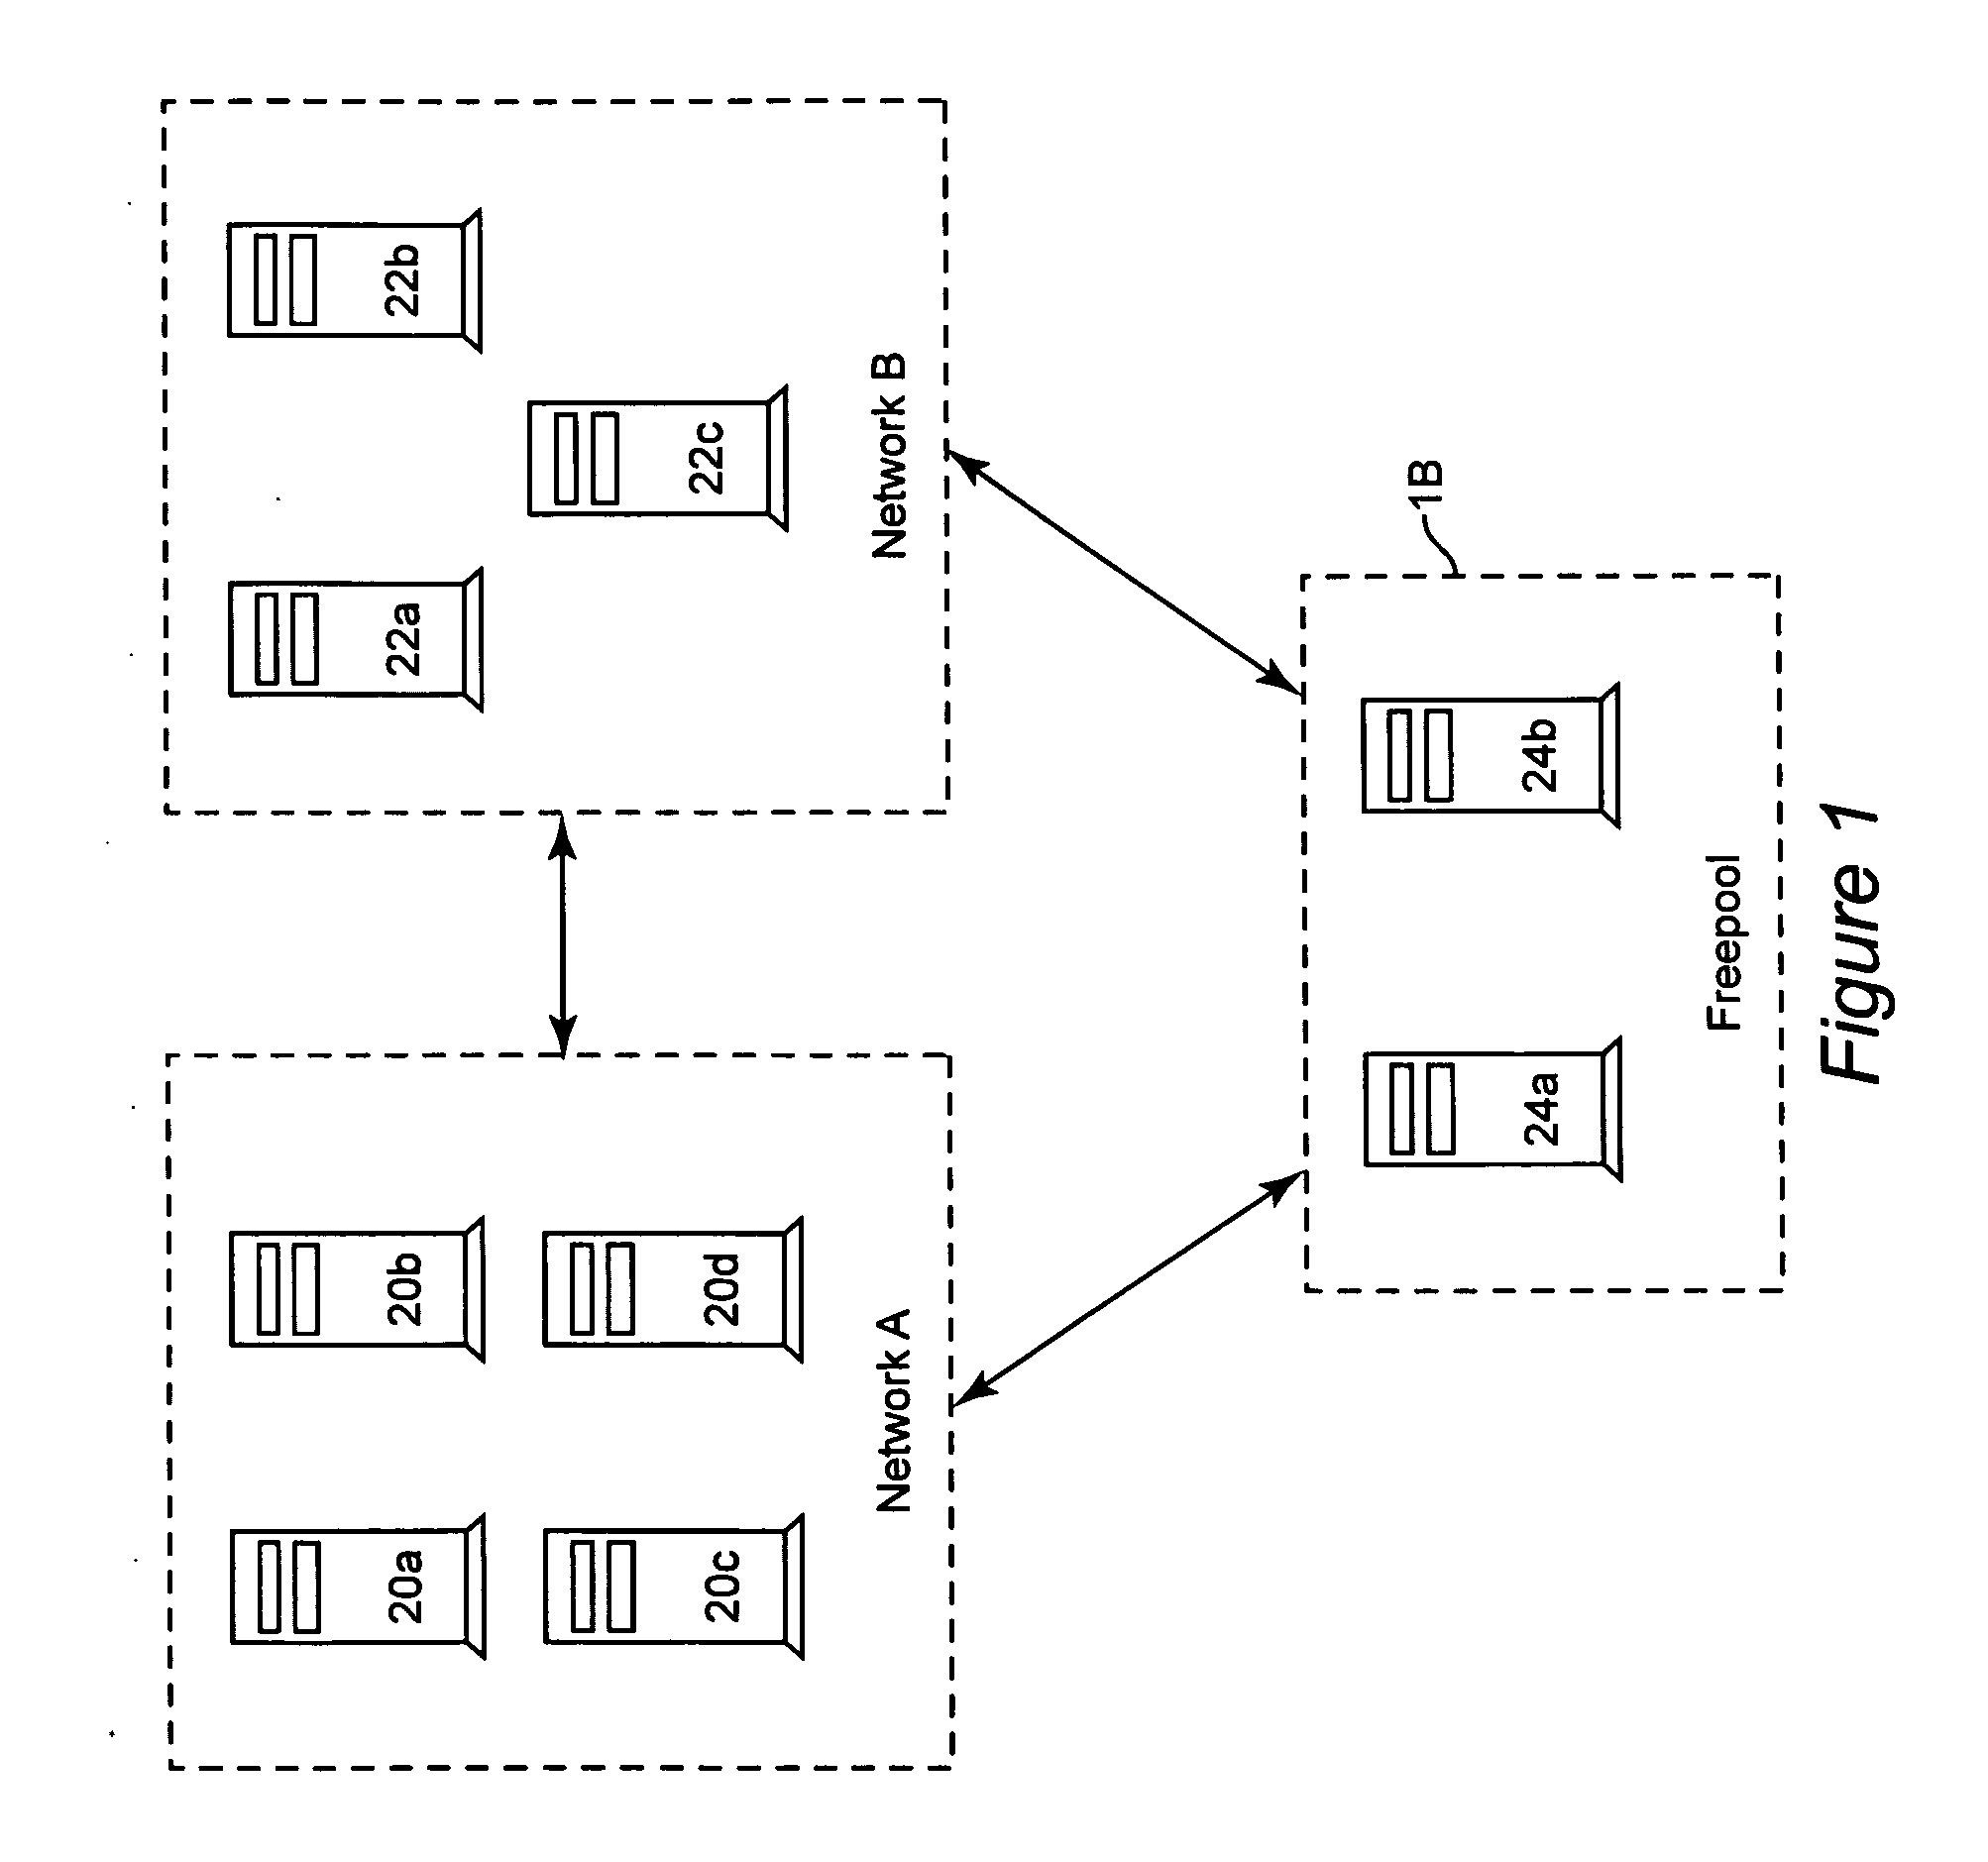 Method and system for dynamically allocating servers to compute-resources using capacity thresholds